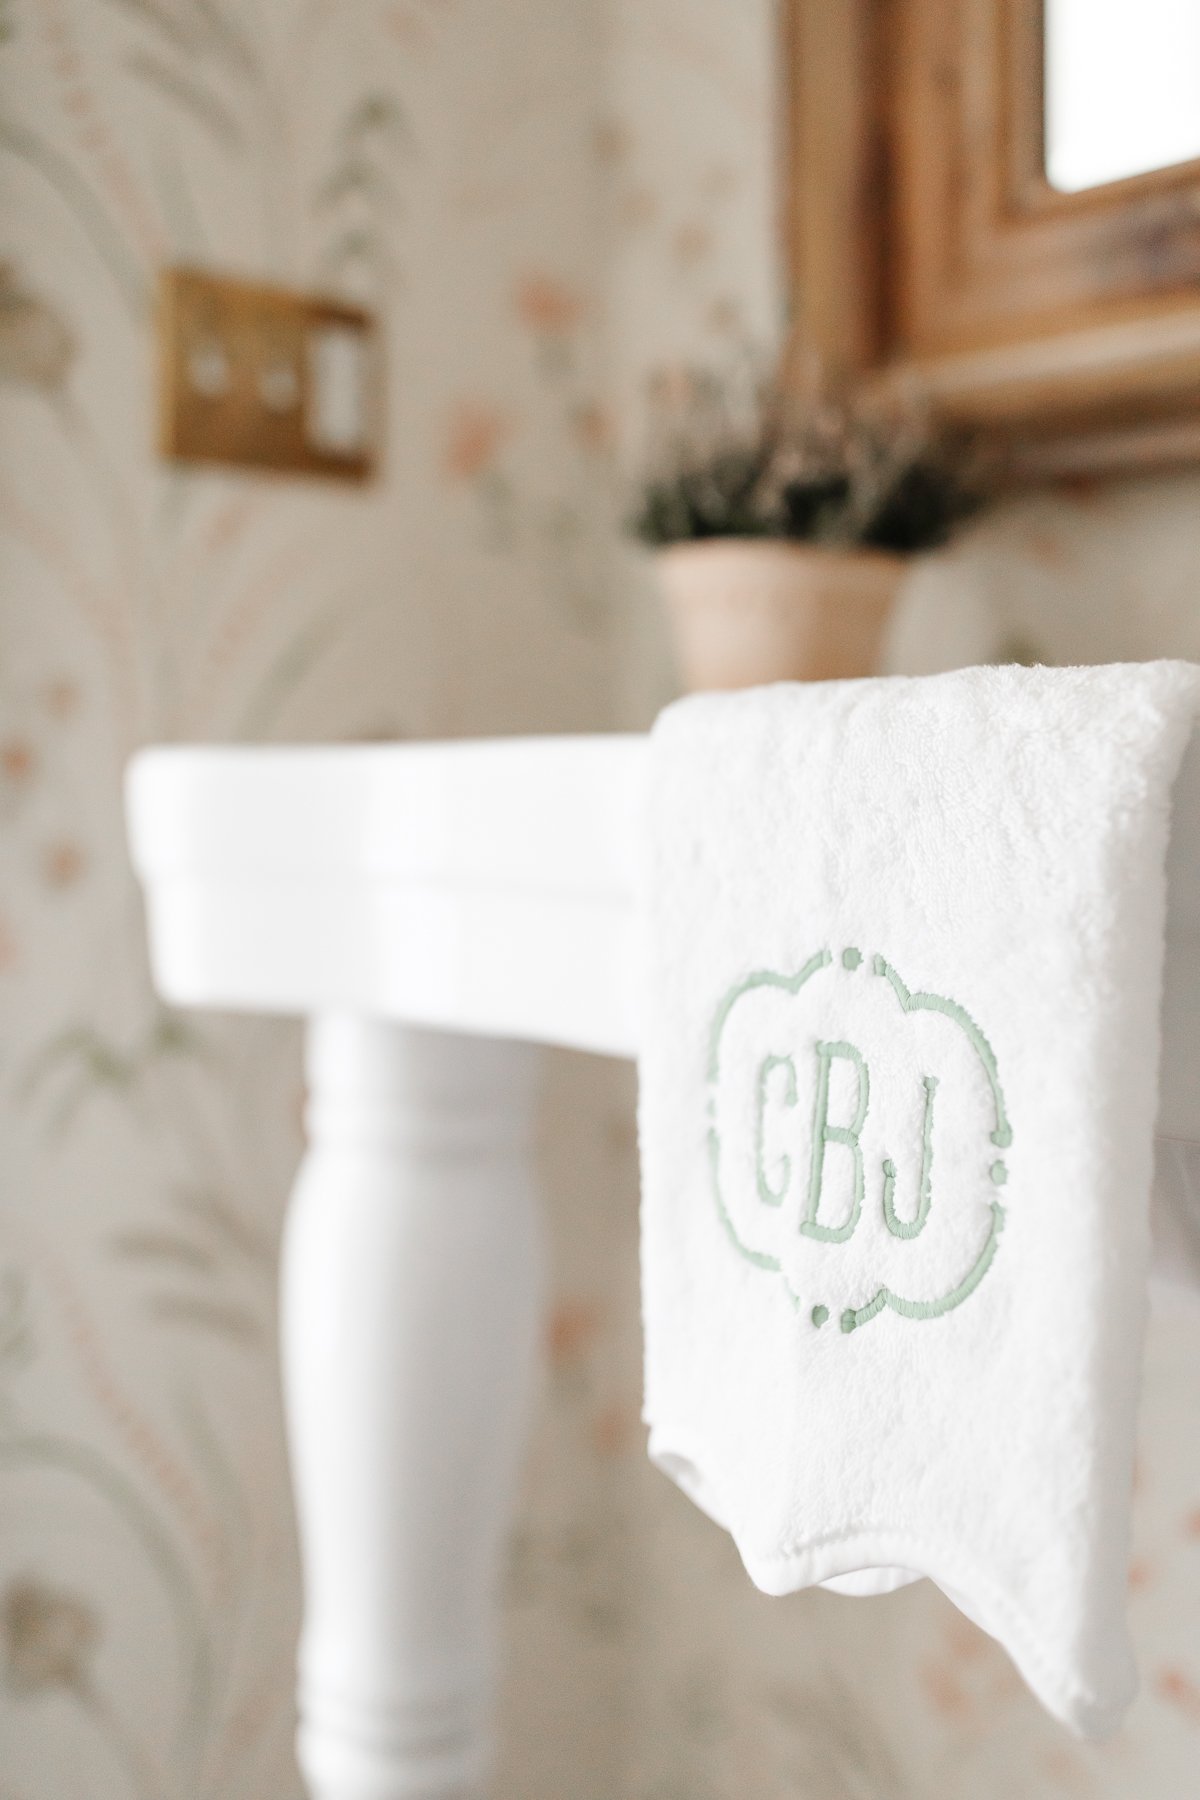 A white pedestal sink with an embroidered towel hanging over the edge